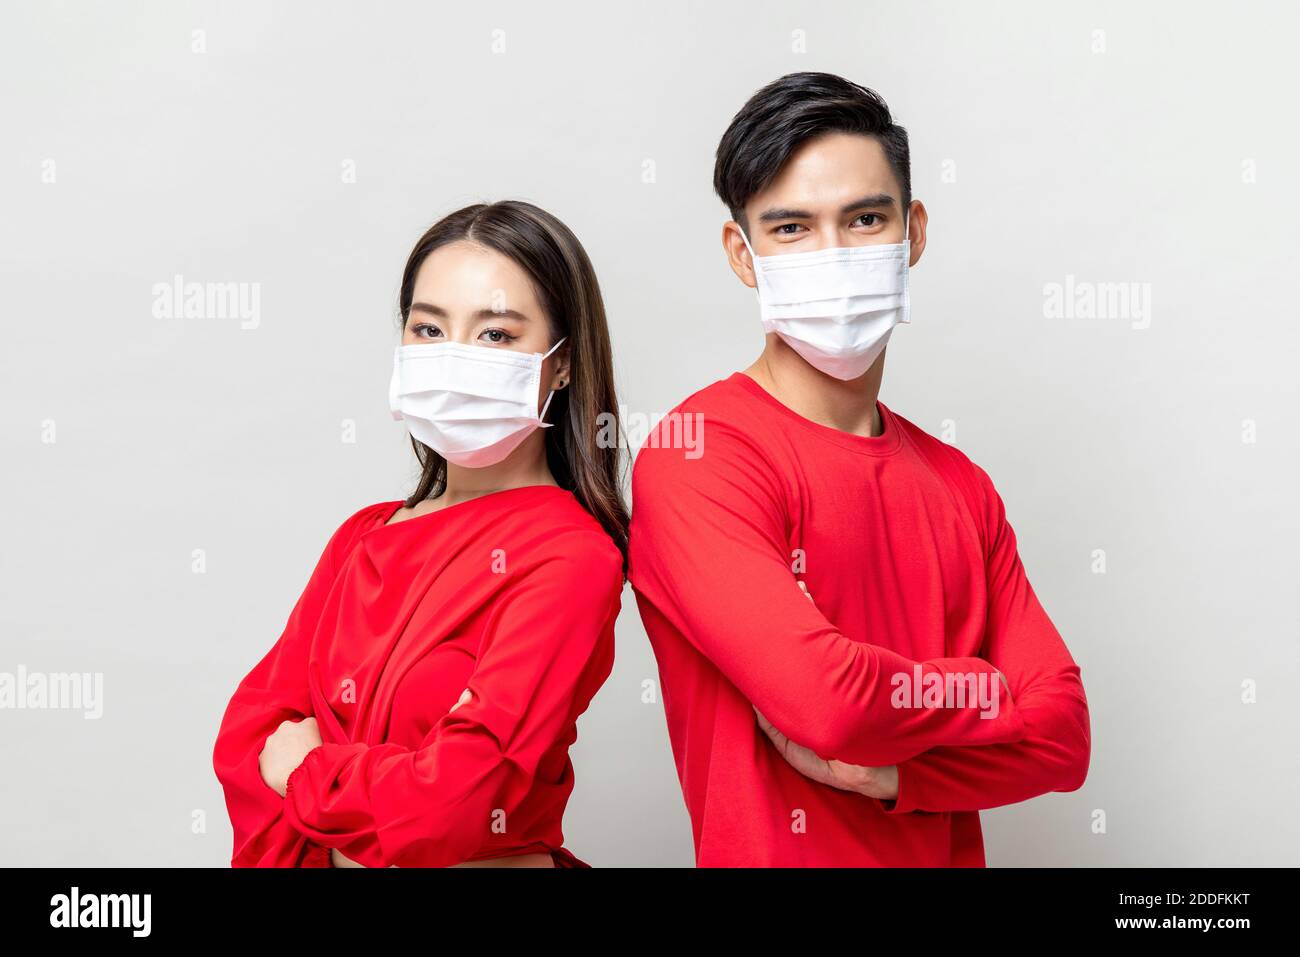 Young Asian couple wearing medical face masks and doing arms crossed gesture isolated on light gray background, Coronavirus protection concept Stock Photo